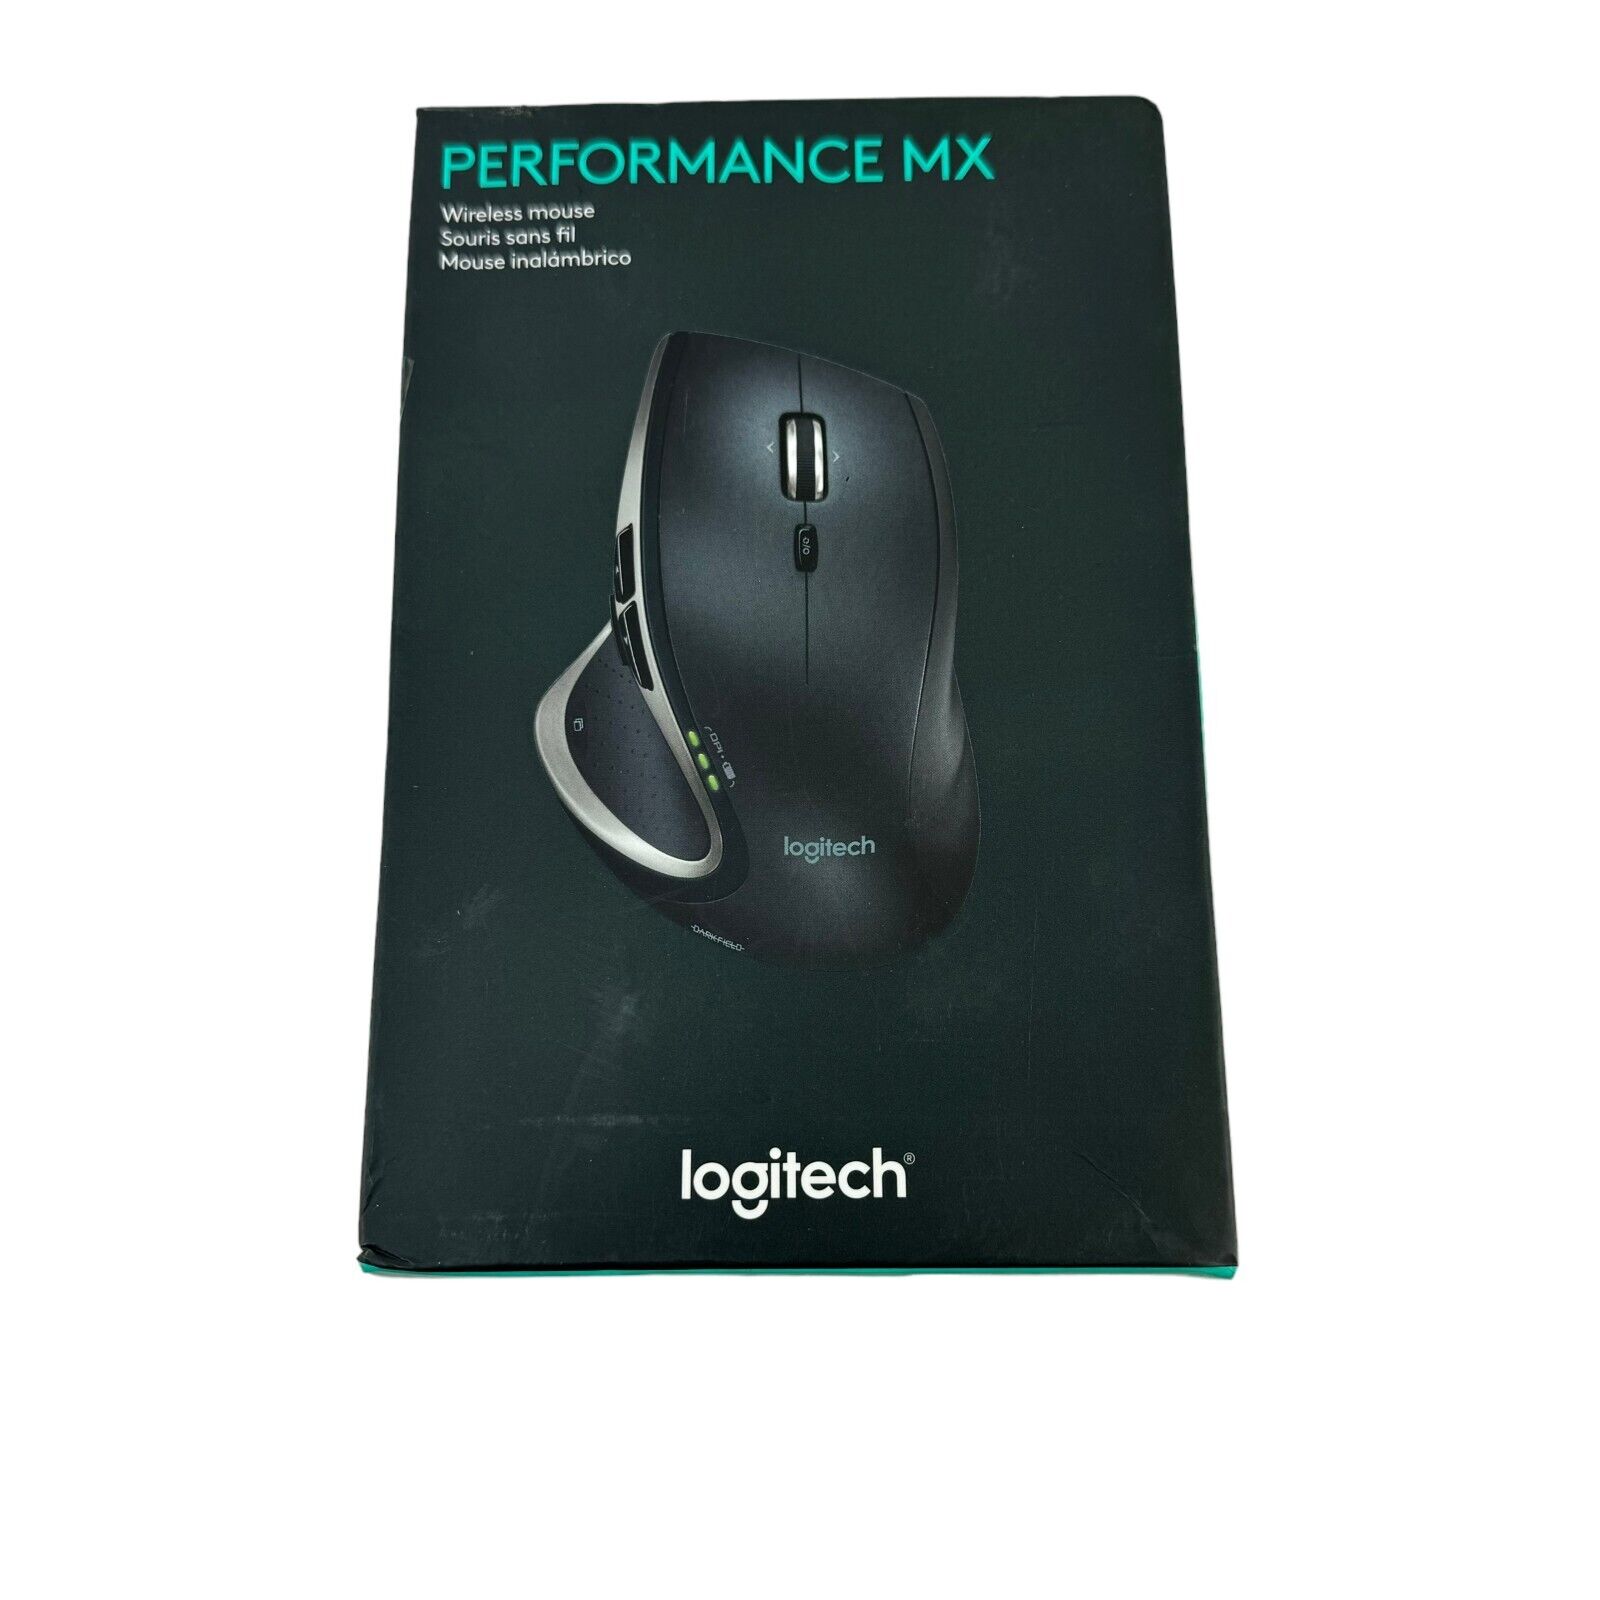 Logitech Performance MX Wireless Mouse - PC or Mac  (Factory Sealed)